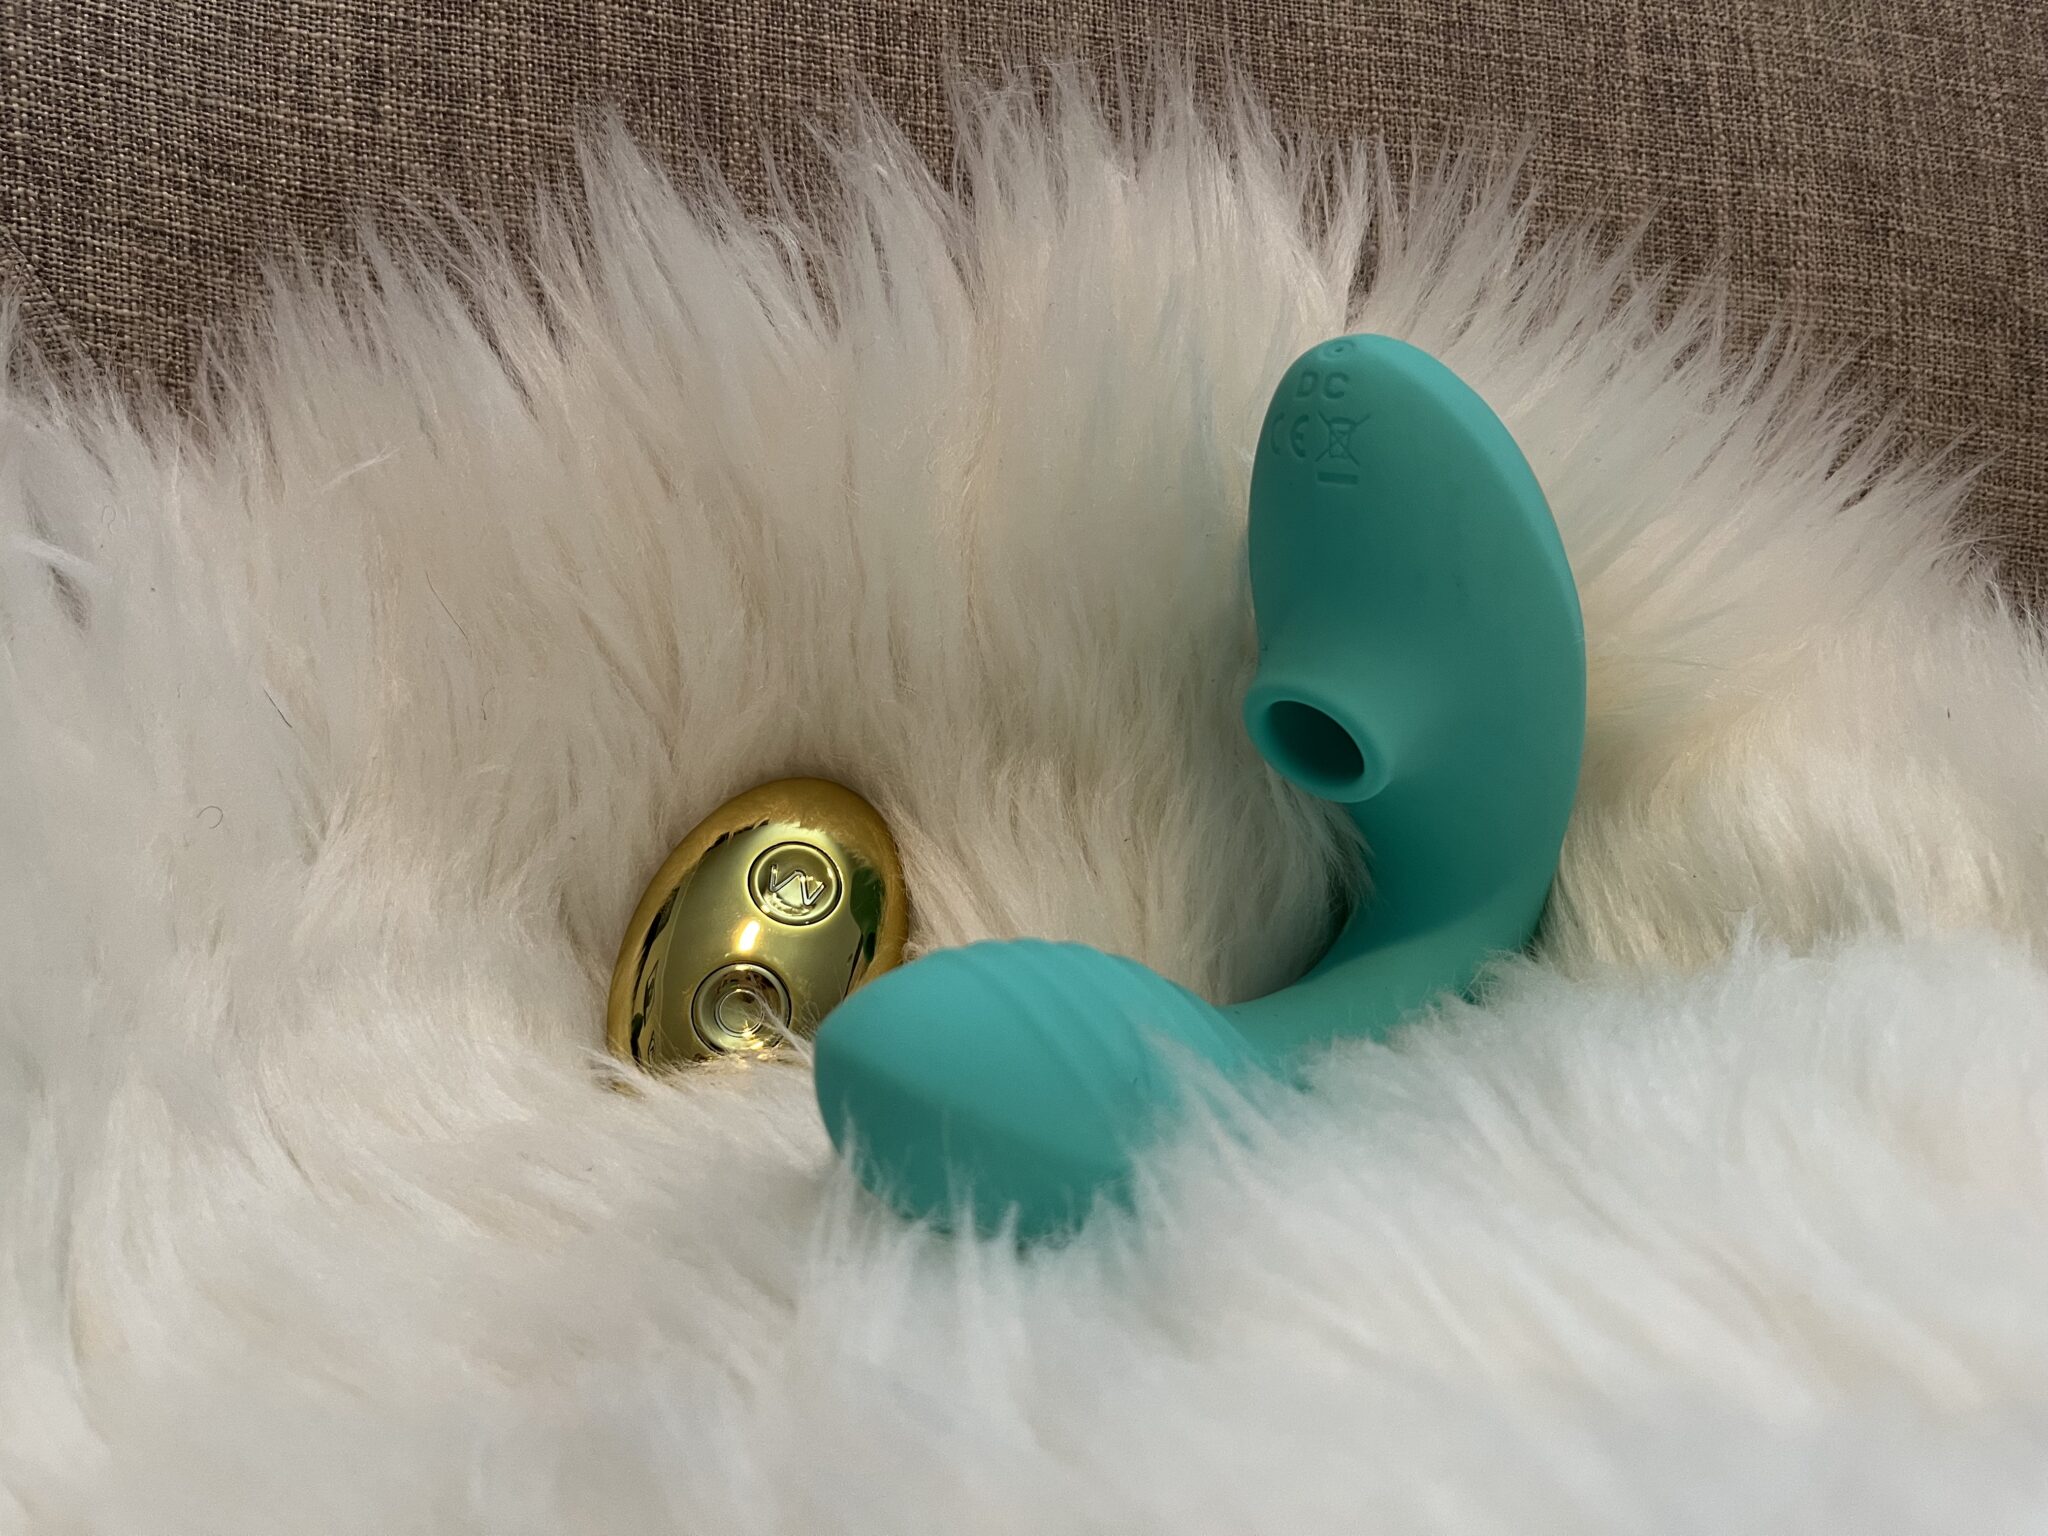 The Tracy's Dog OG Pro 2 clitoral sucking vibrator is teal with gold accents and a golden remote.